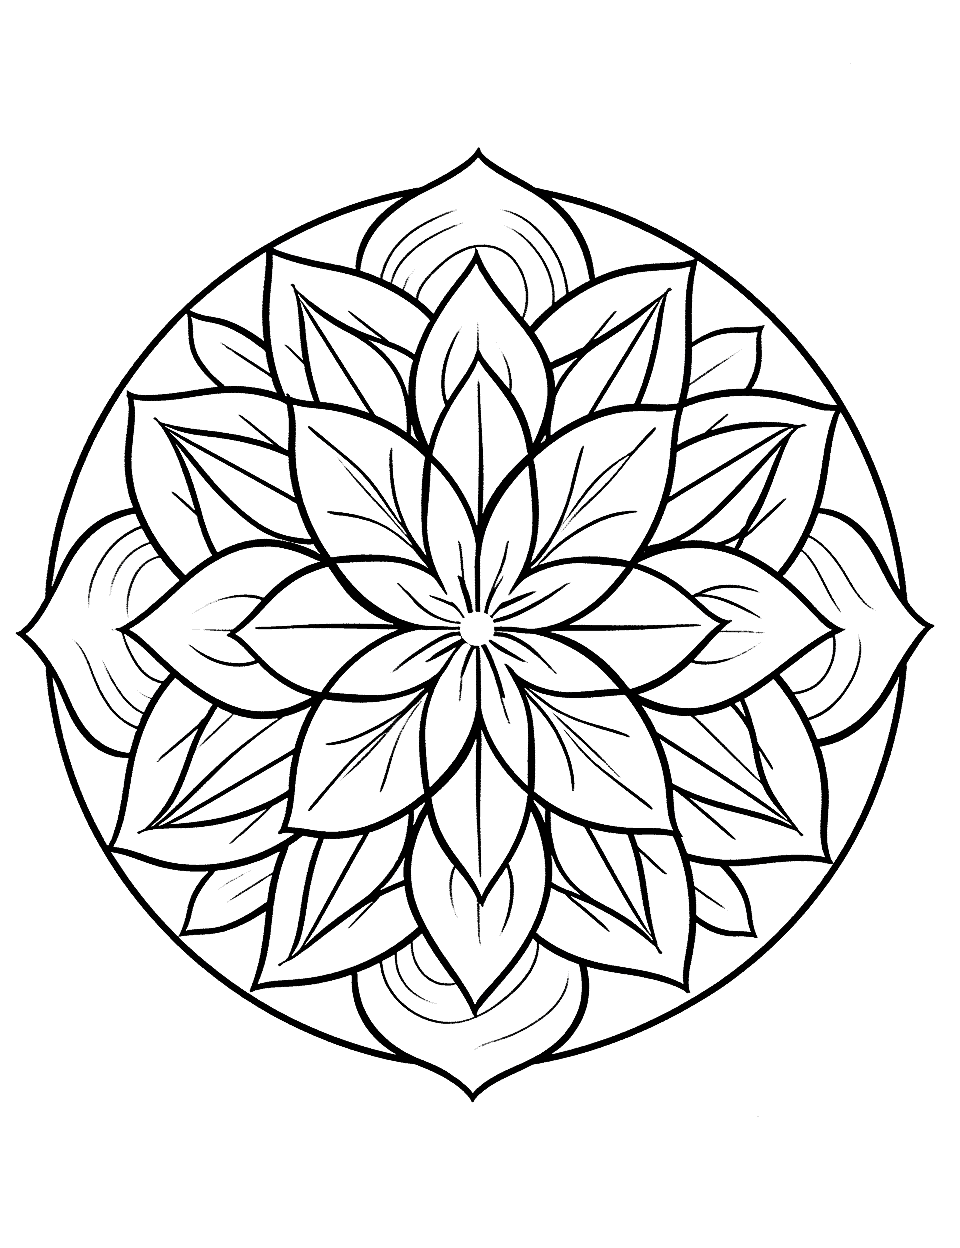 Autumn Leaves Mandala Coloring Page - A beautiful, detailed mandala inspired by the changing leaves of fall, perfect for seasonal coloring.